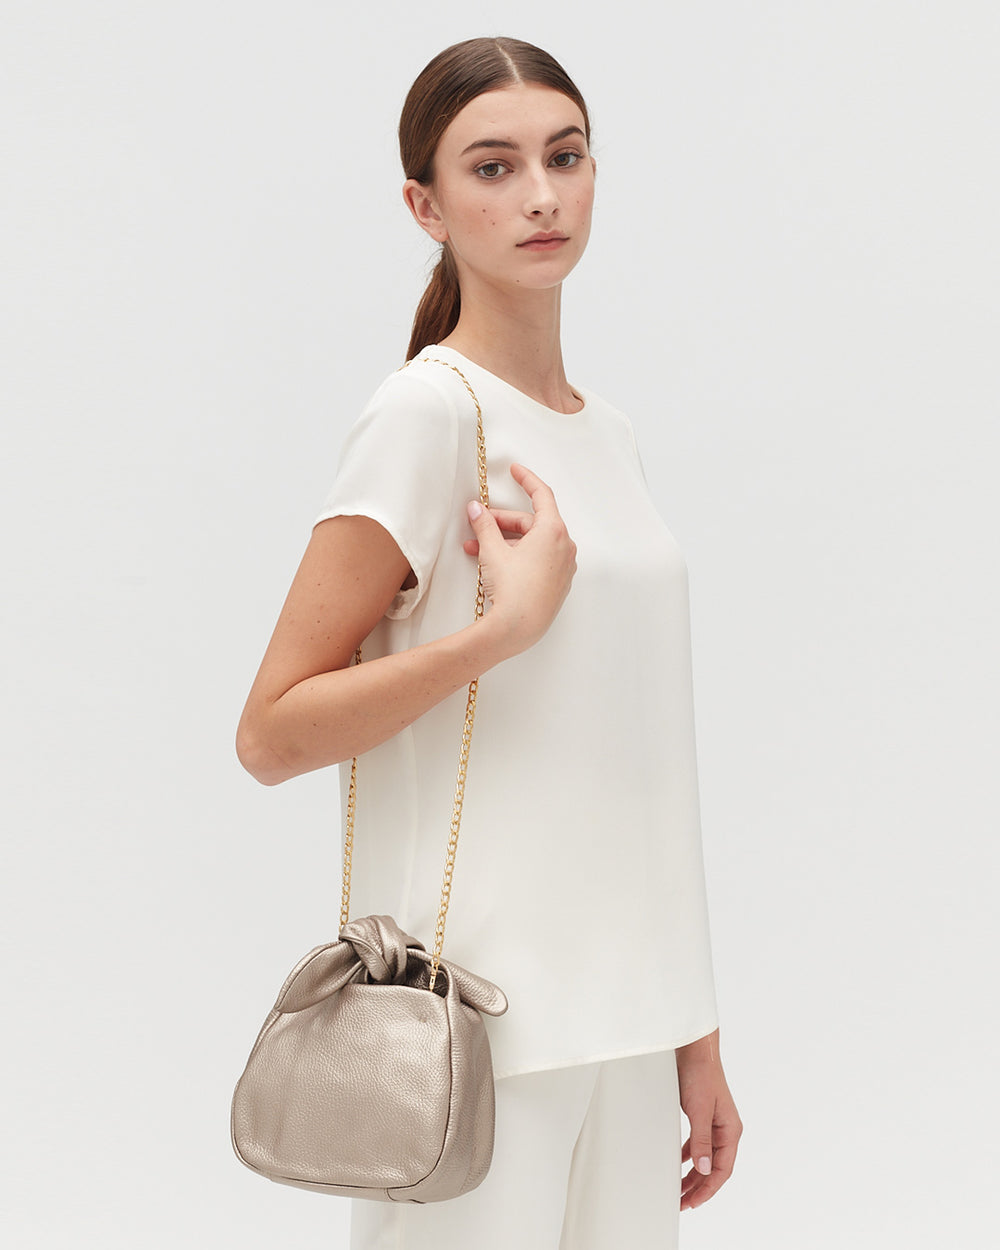 Woman standing and holding a purse with shoulder strap.